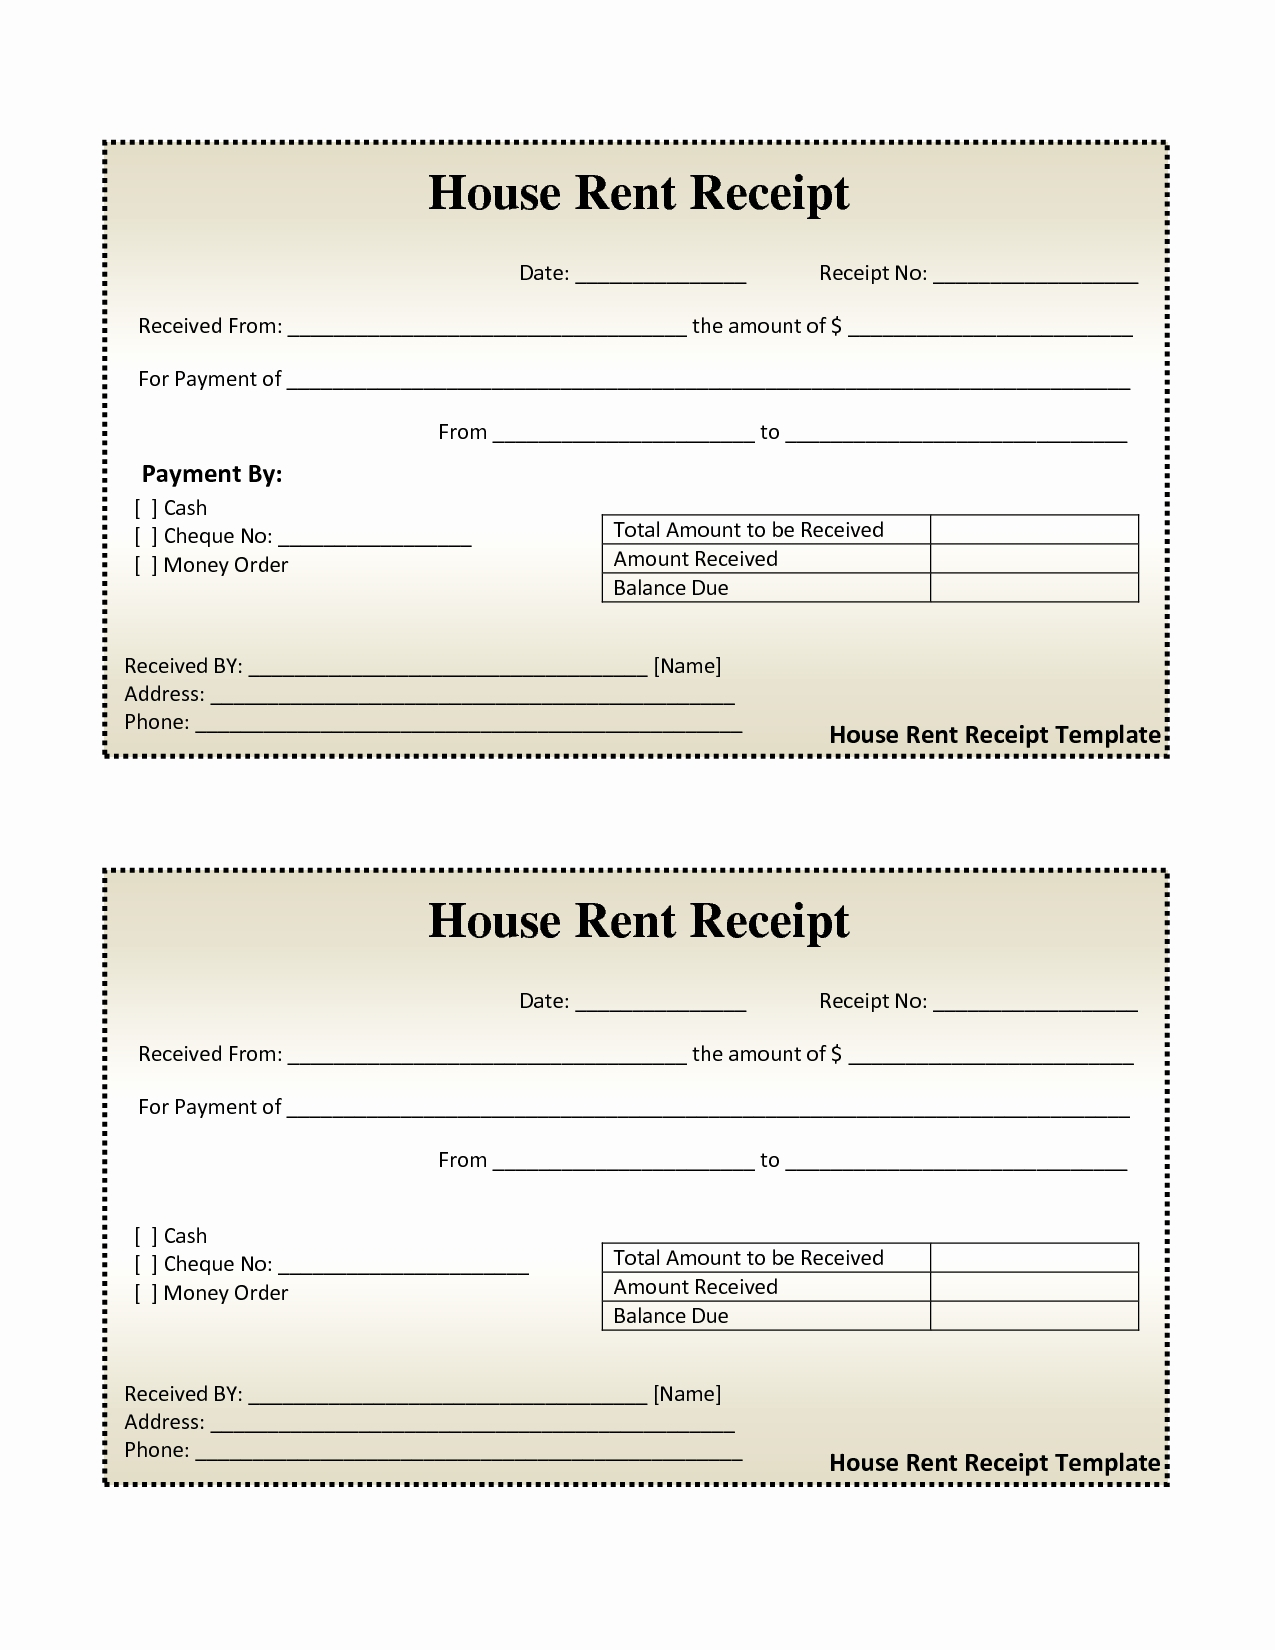 Business Plans Home Inventory Excel S Party Rental Plan Inside Mckinsey Business Plan Template